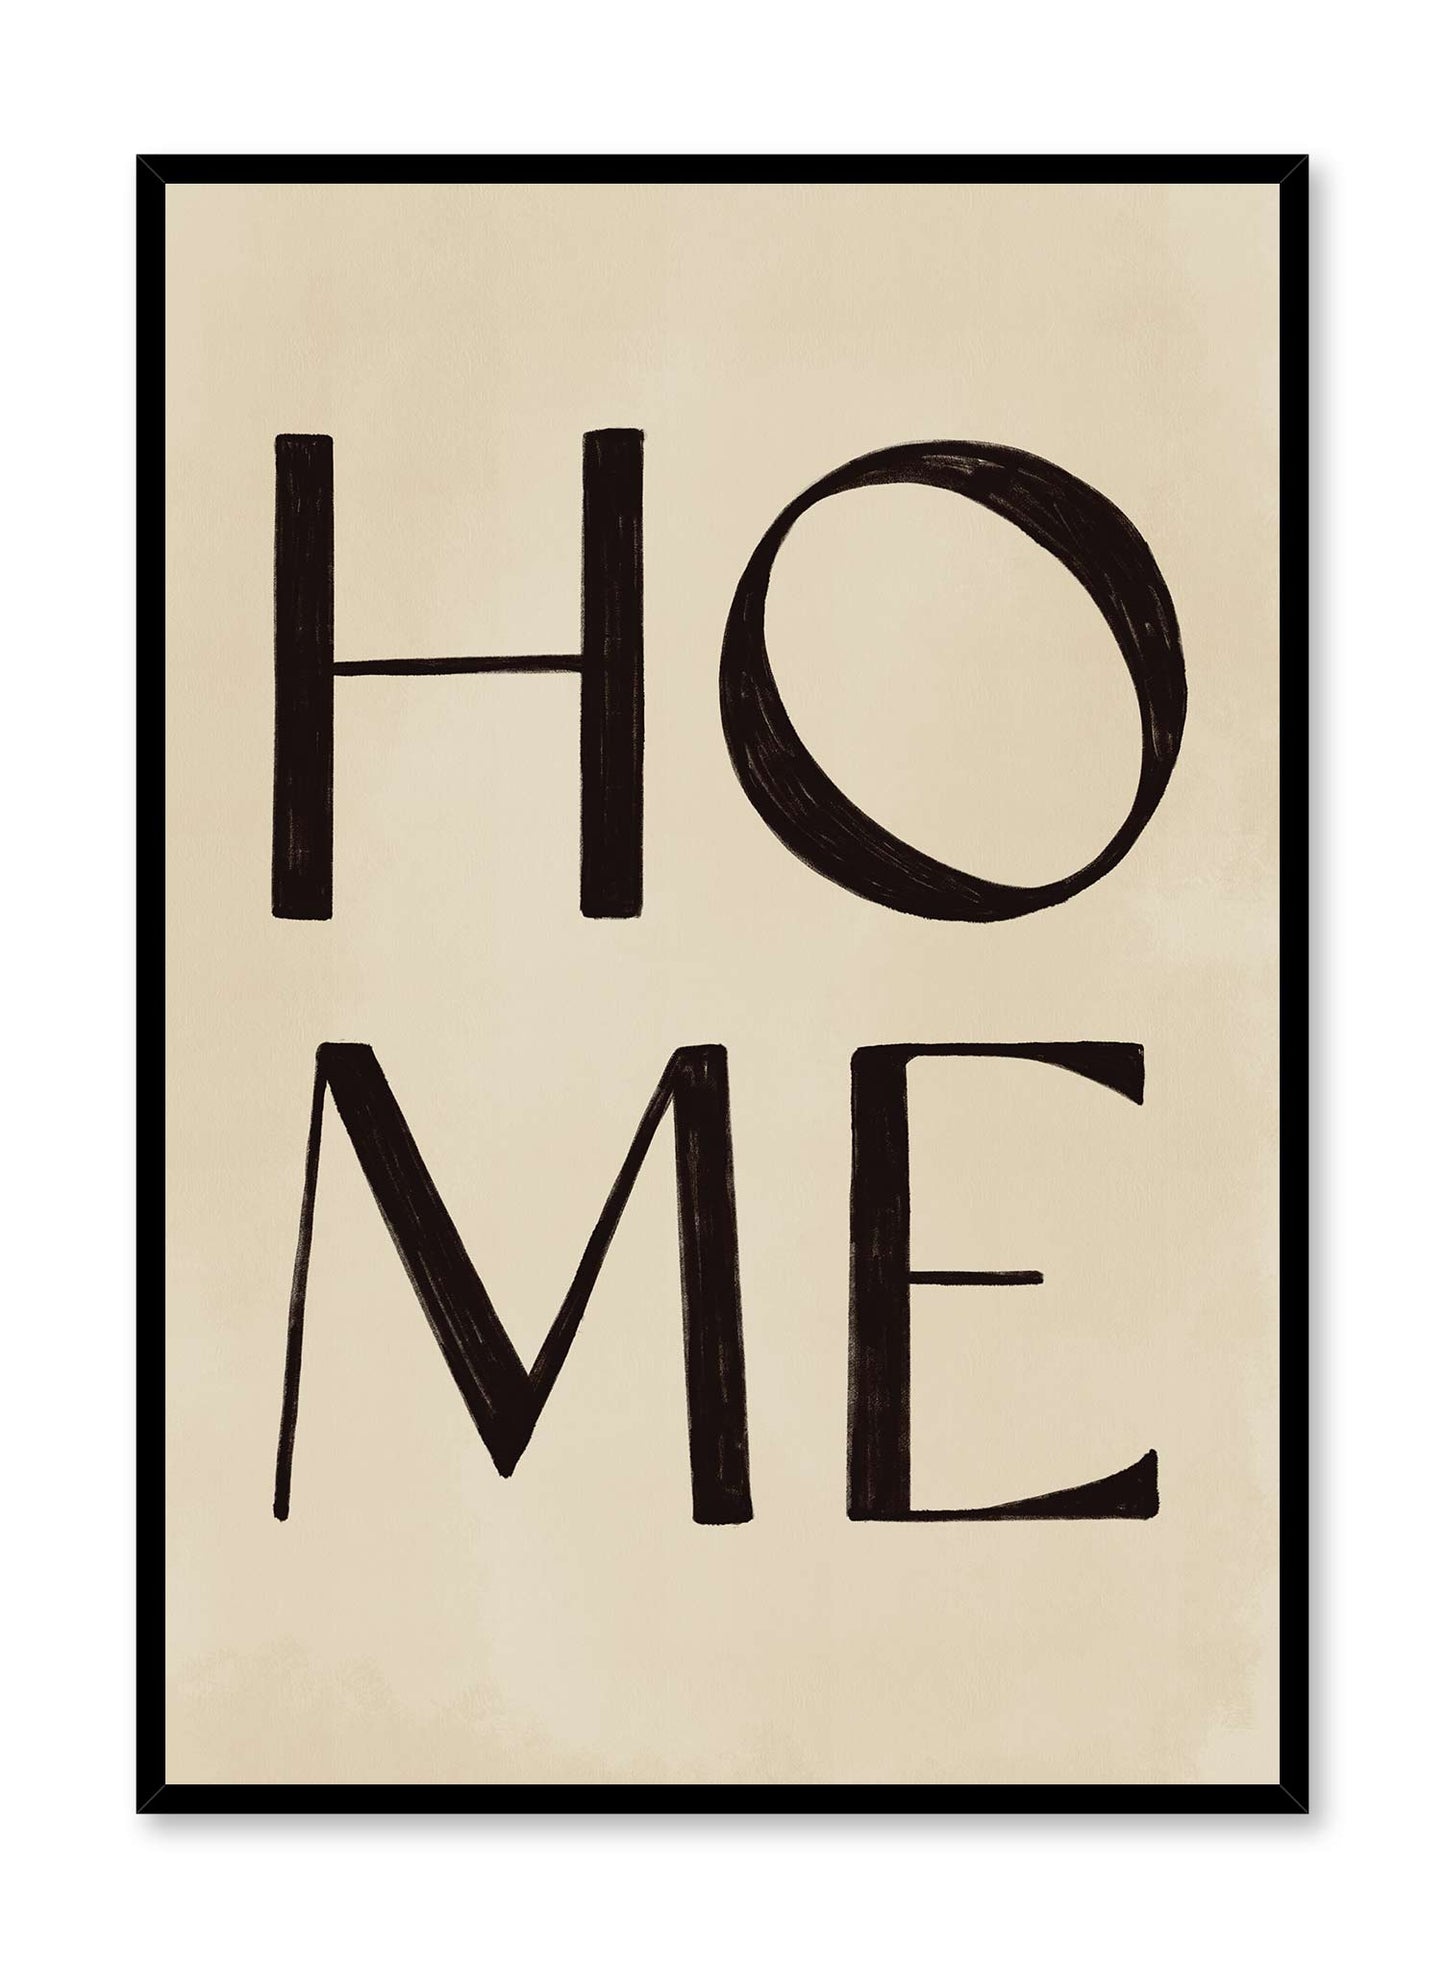 Come Home is a typography and illustration of the word 'Home' written in big font by Audrey Rivet in collaboration with Opposite Wall.